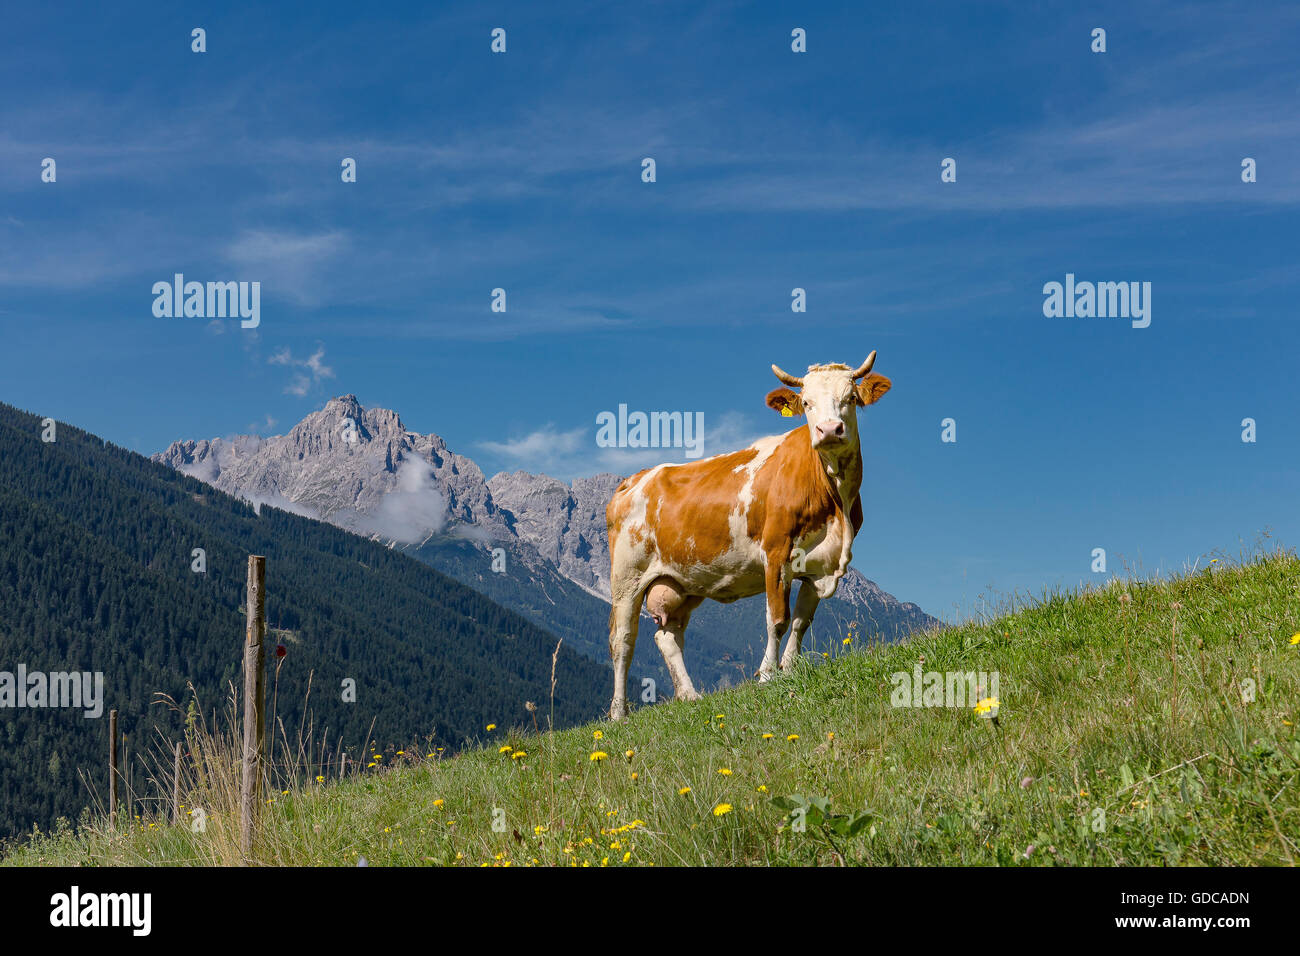 Sillian,Austria,Red-and-white cow at an alpine meadow Stock Photo